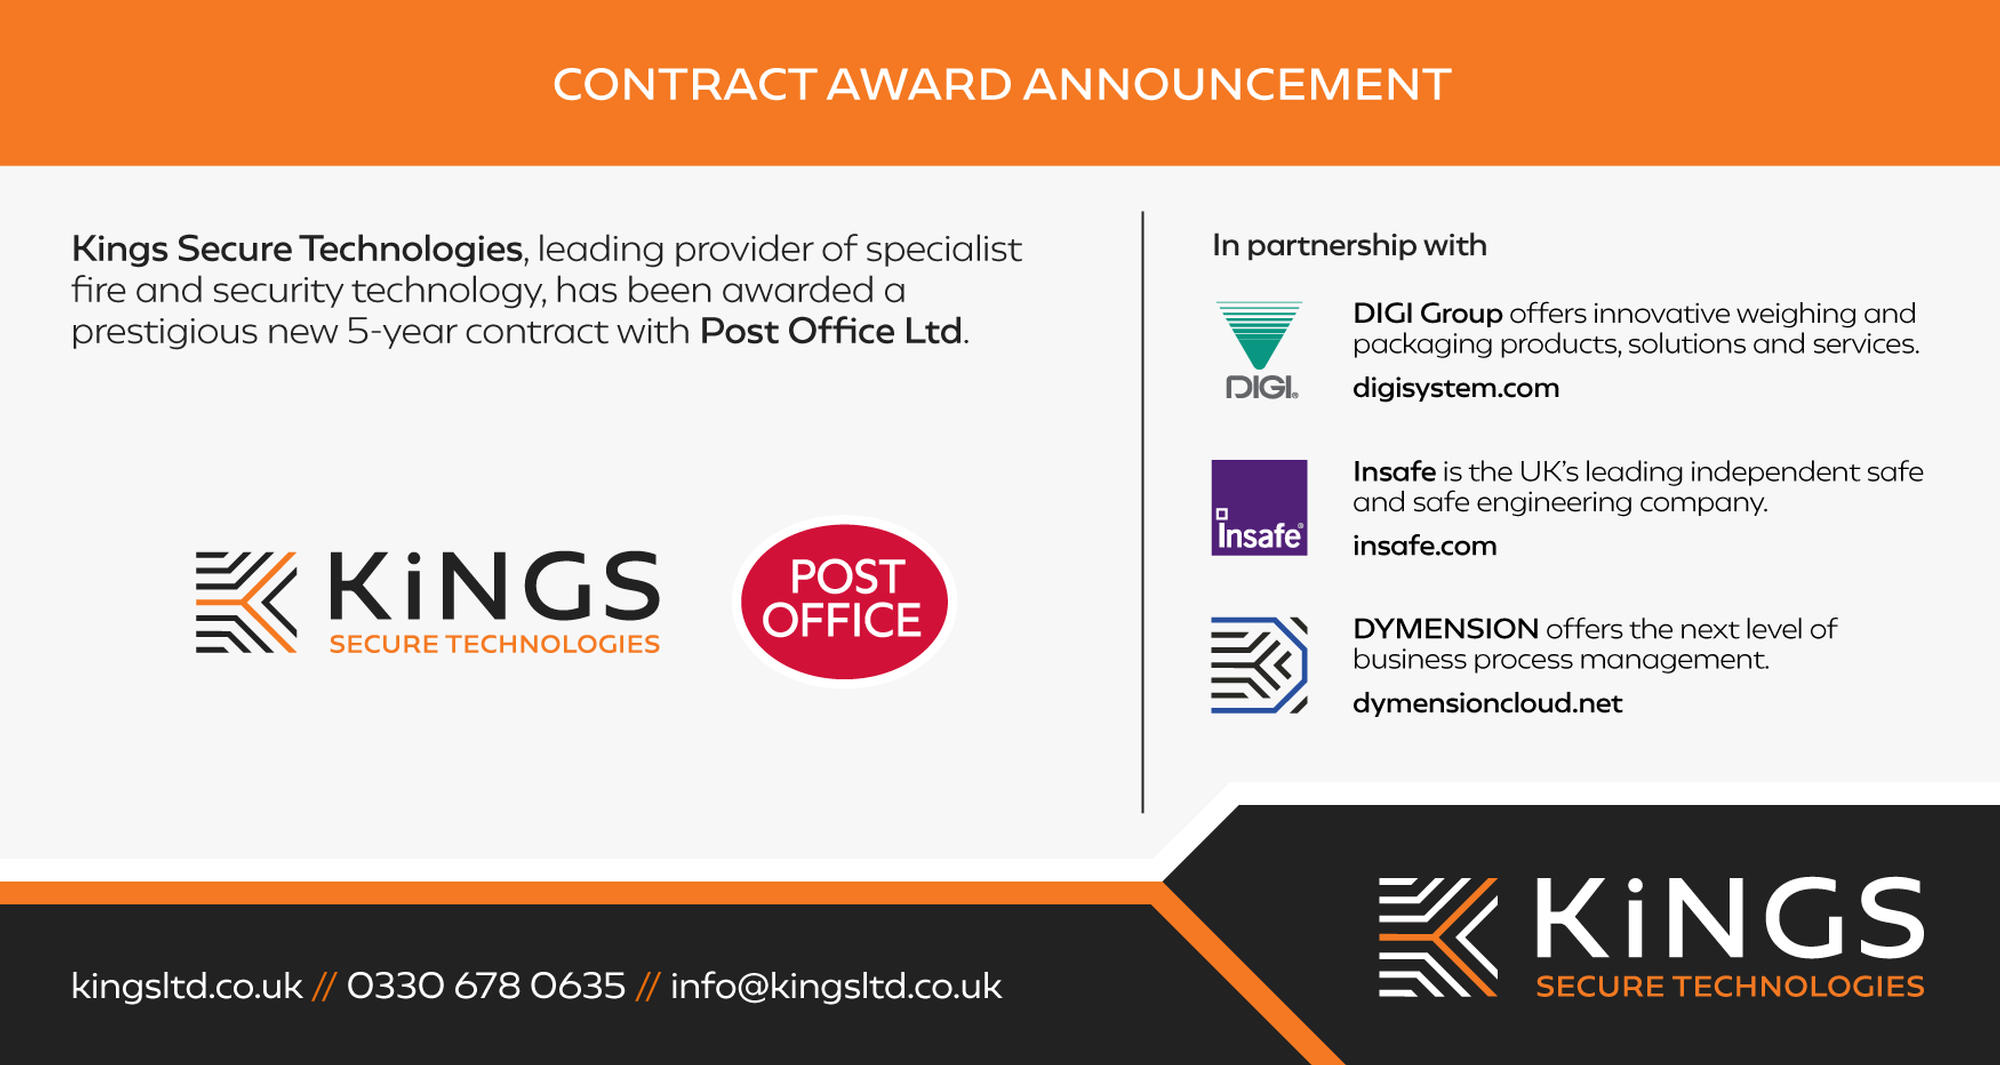 KINGS SECURE TECHNOLOGIES AWARDED PRESTIGIOUS CONTRACT WITH POST OFFICE LIMITED